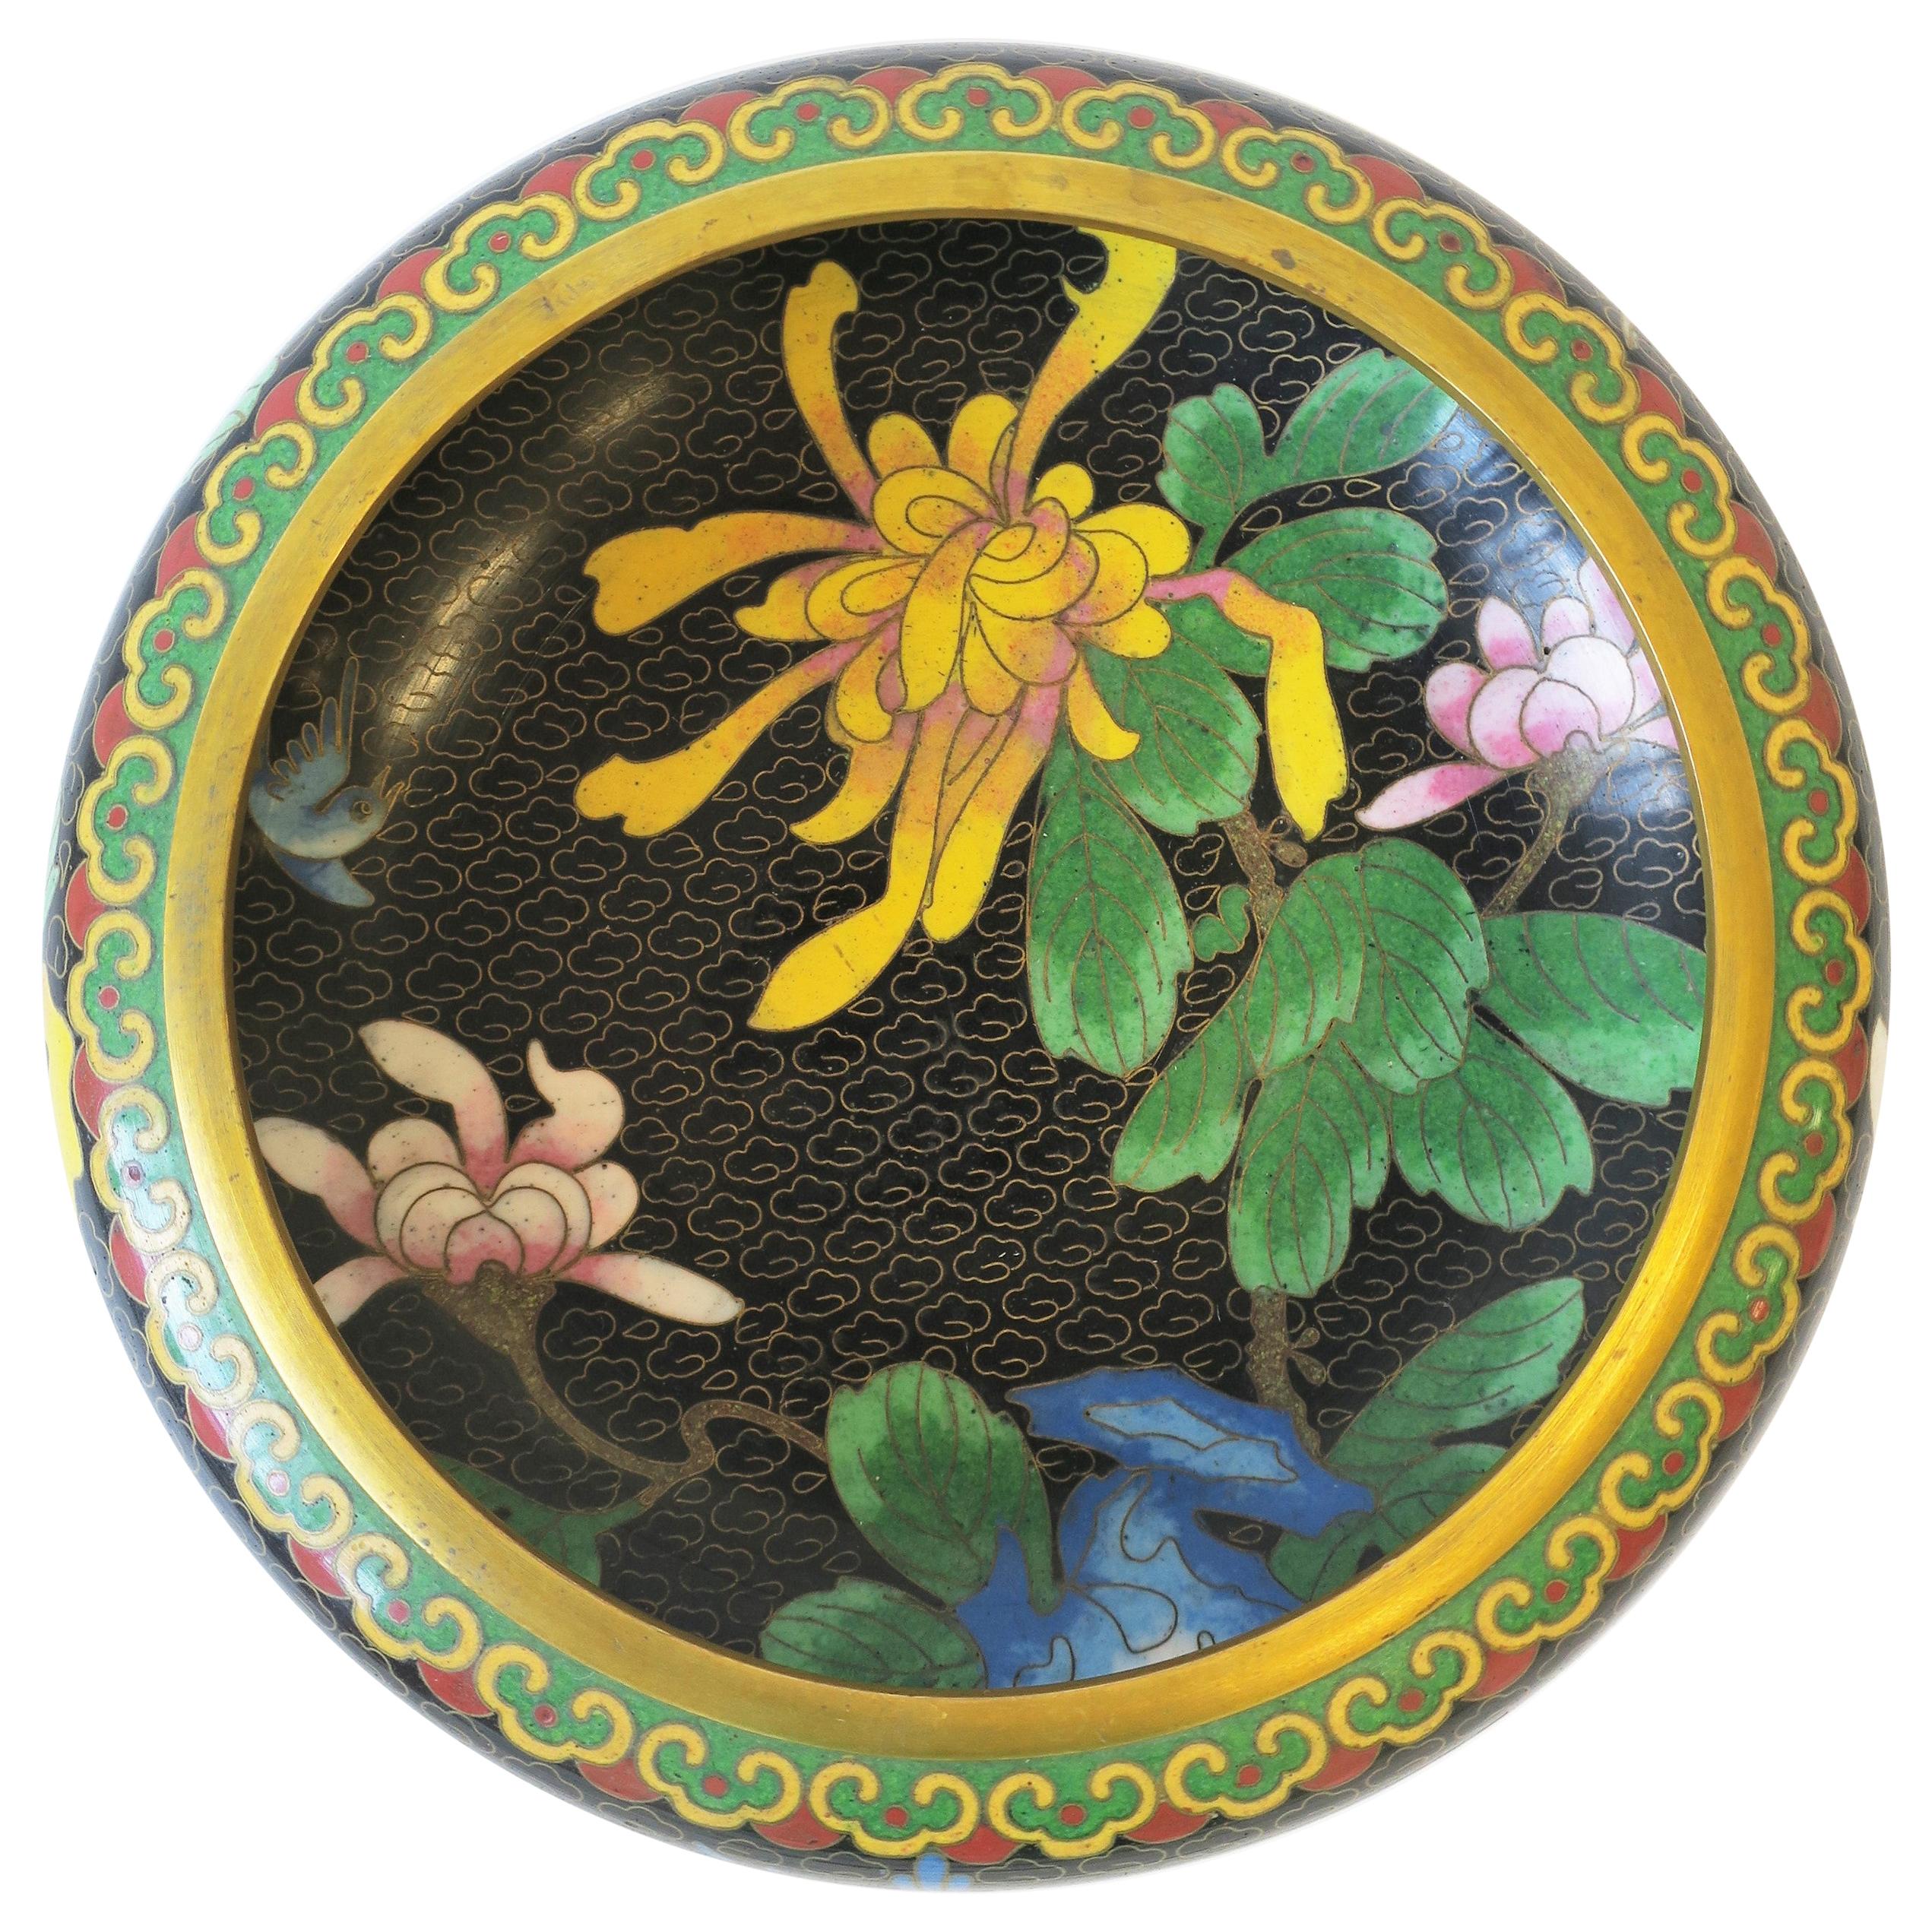 Cloisonné Enamel and Brass Bowl with Flowers and Birds